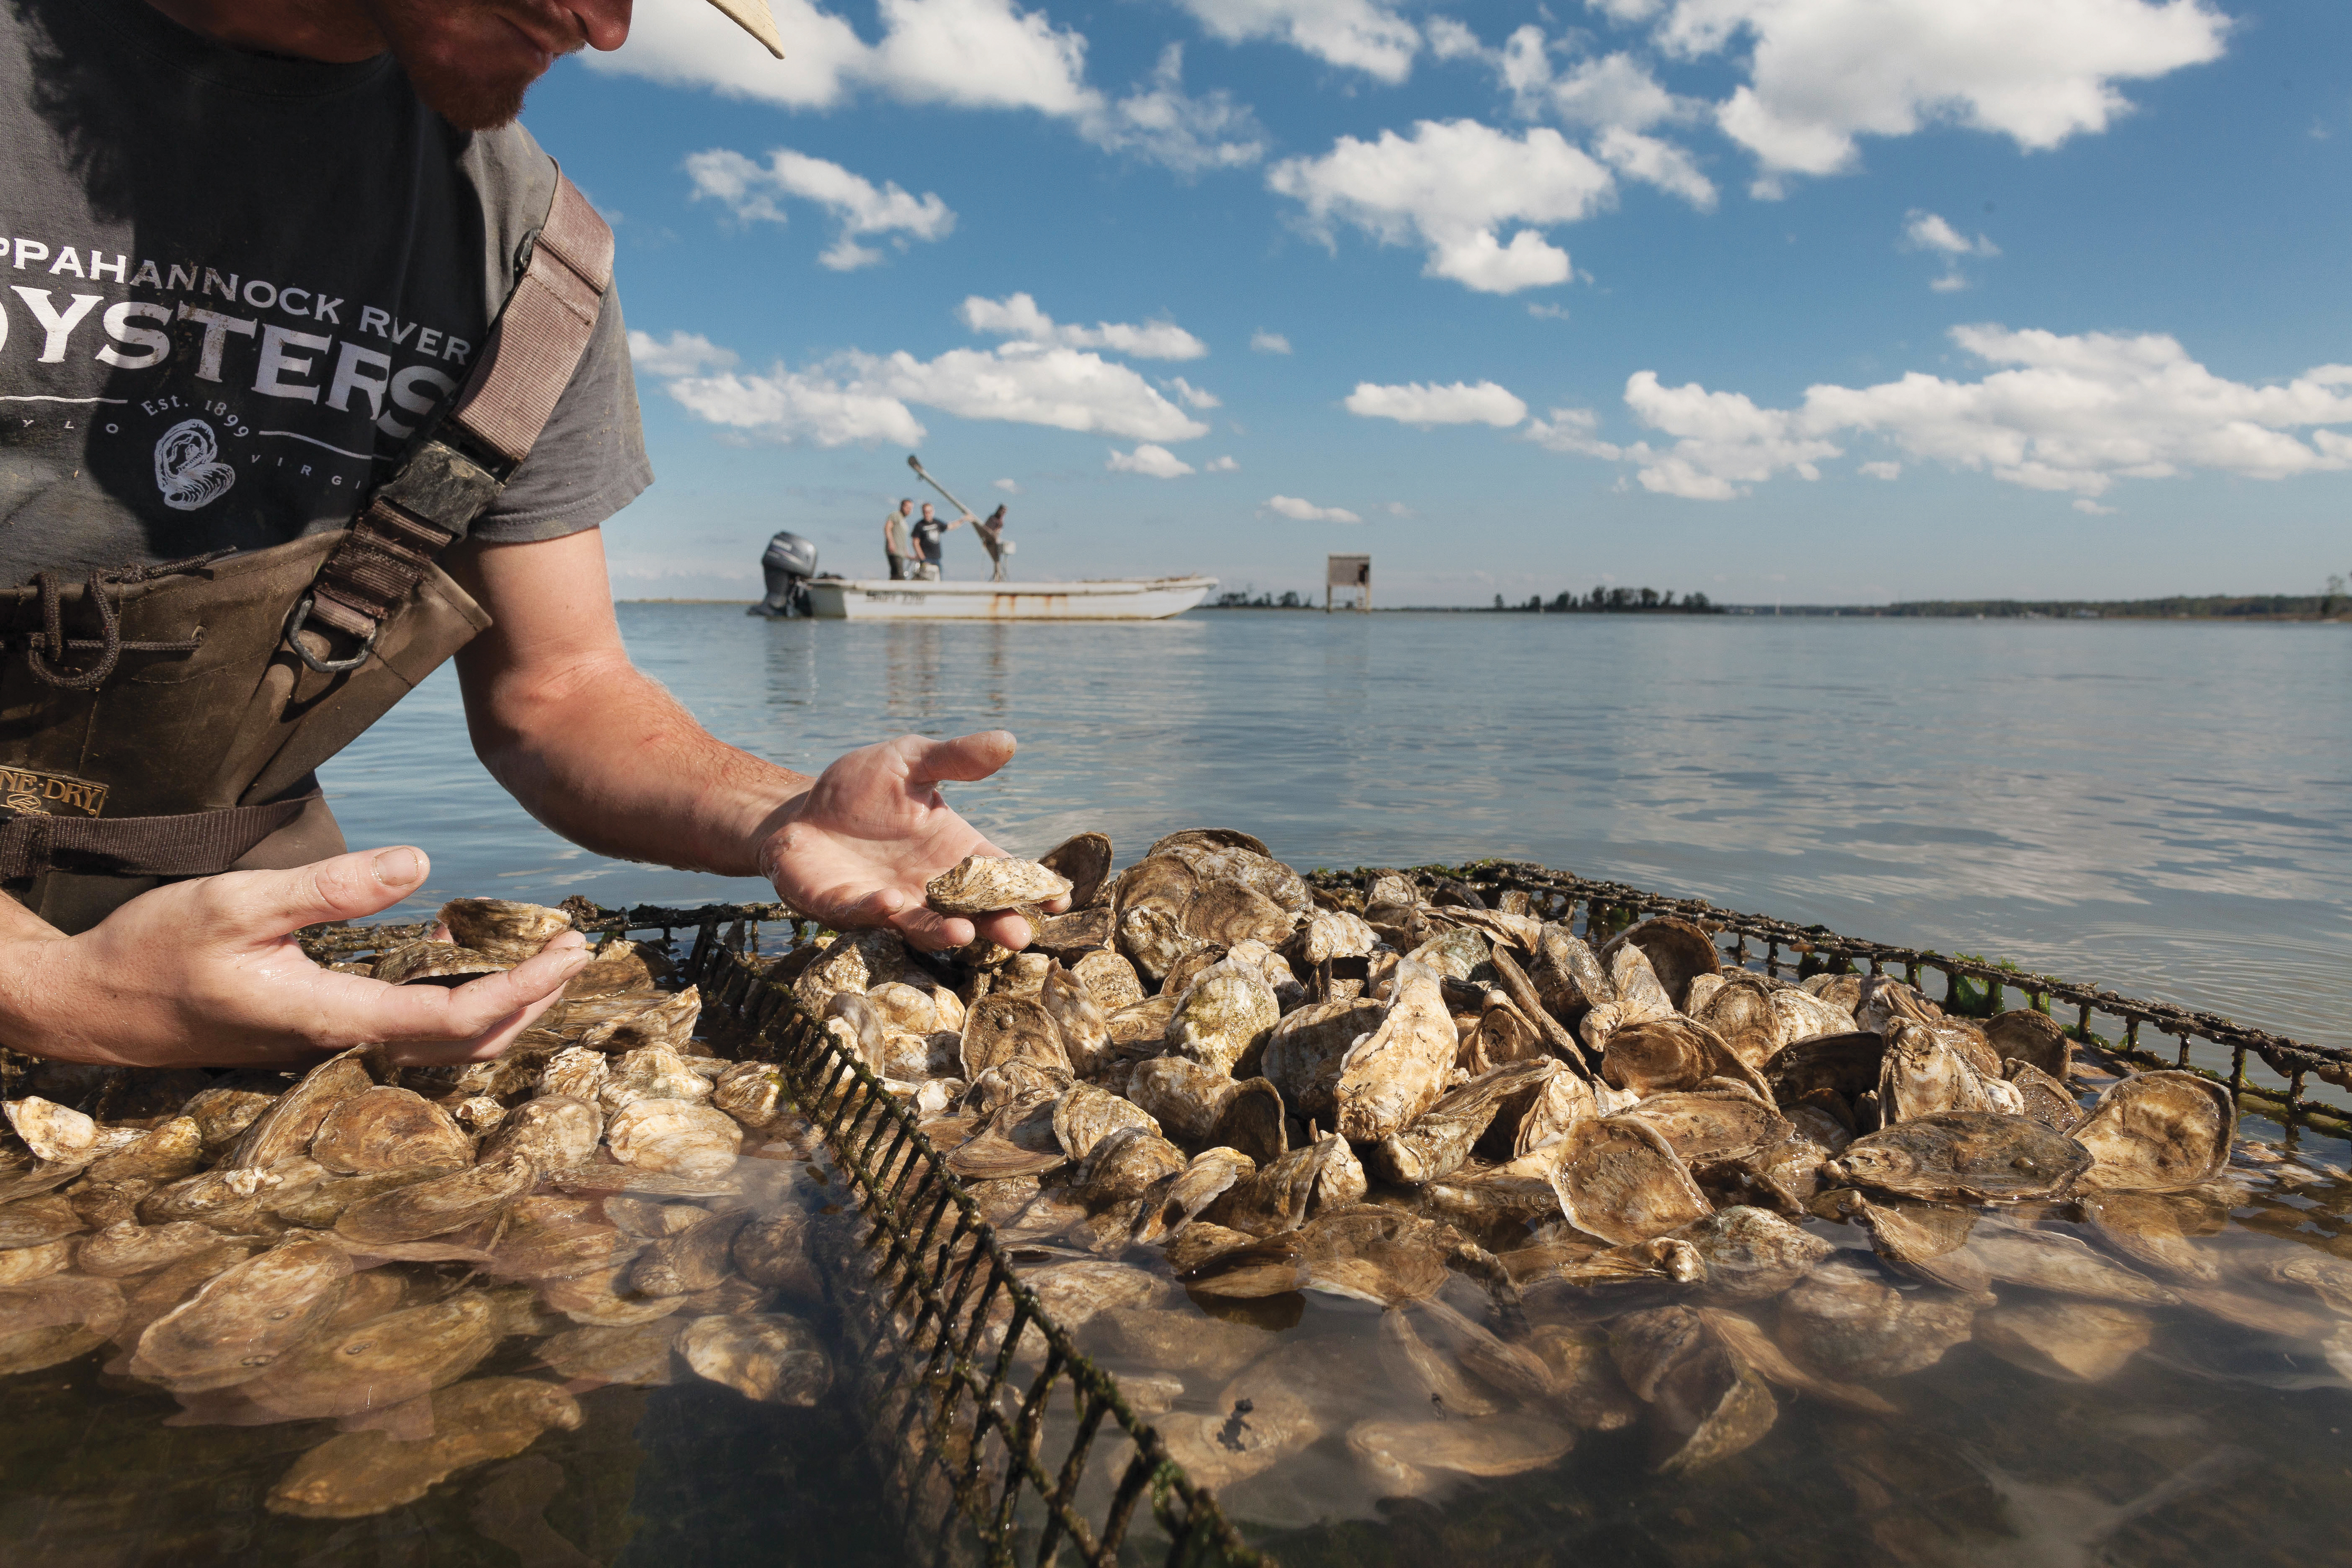 Rappahannock Oyster Co., Middlesex County